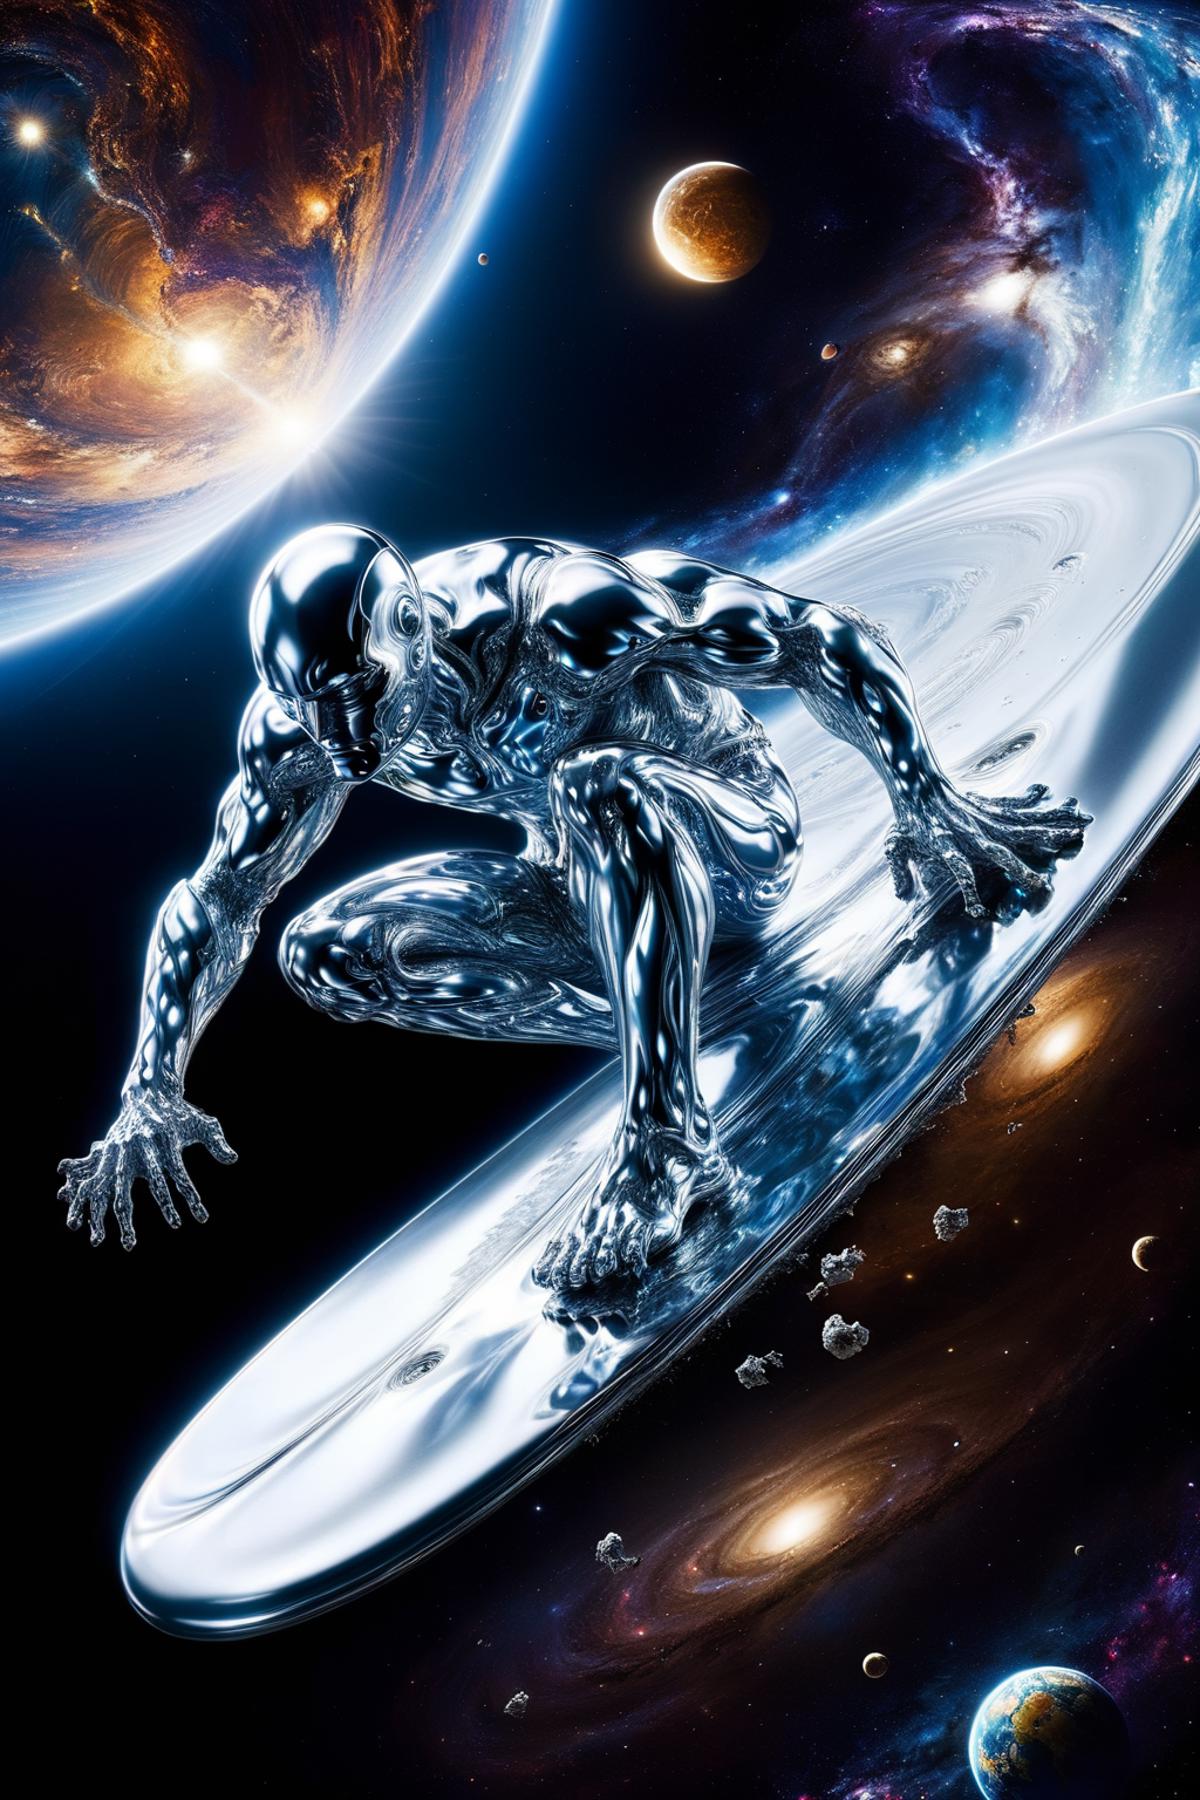 A robotic figure with a silver body and metallic hands, riding a circular object.